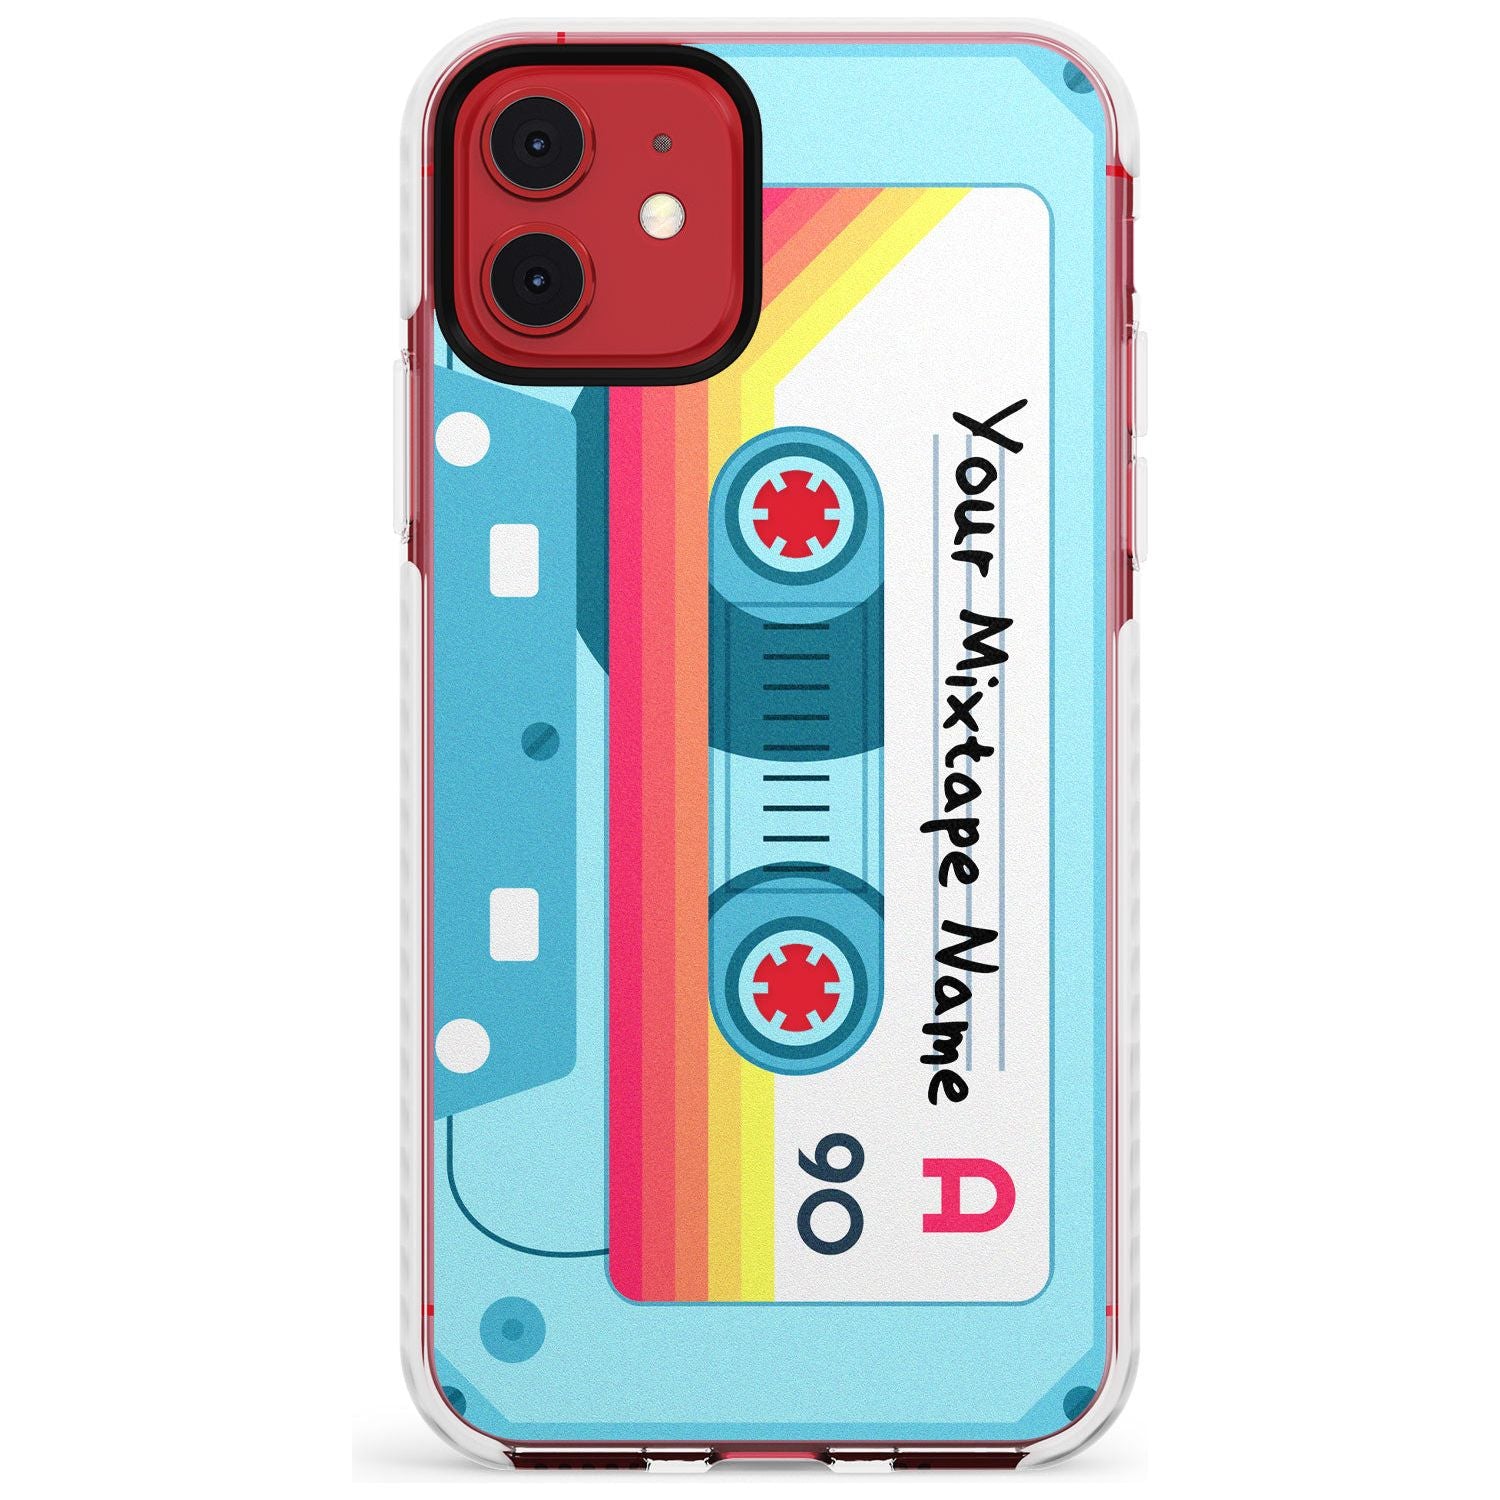 Sporty Cassette Slim TPU Phone Case for iPhone 11